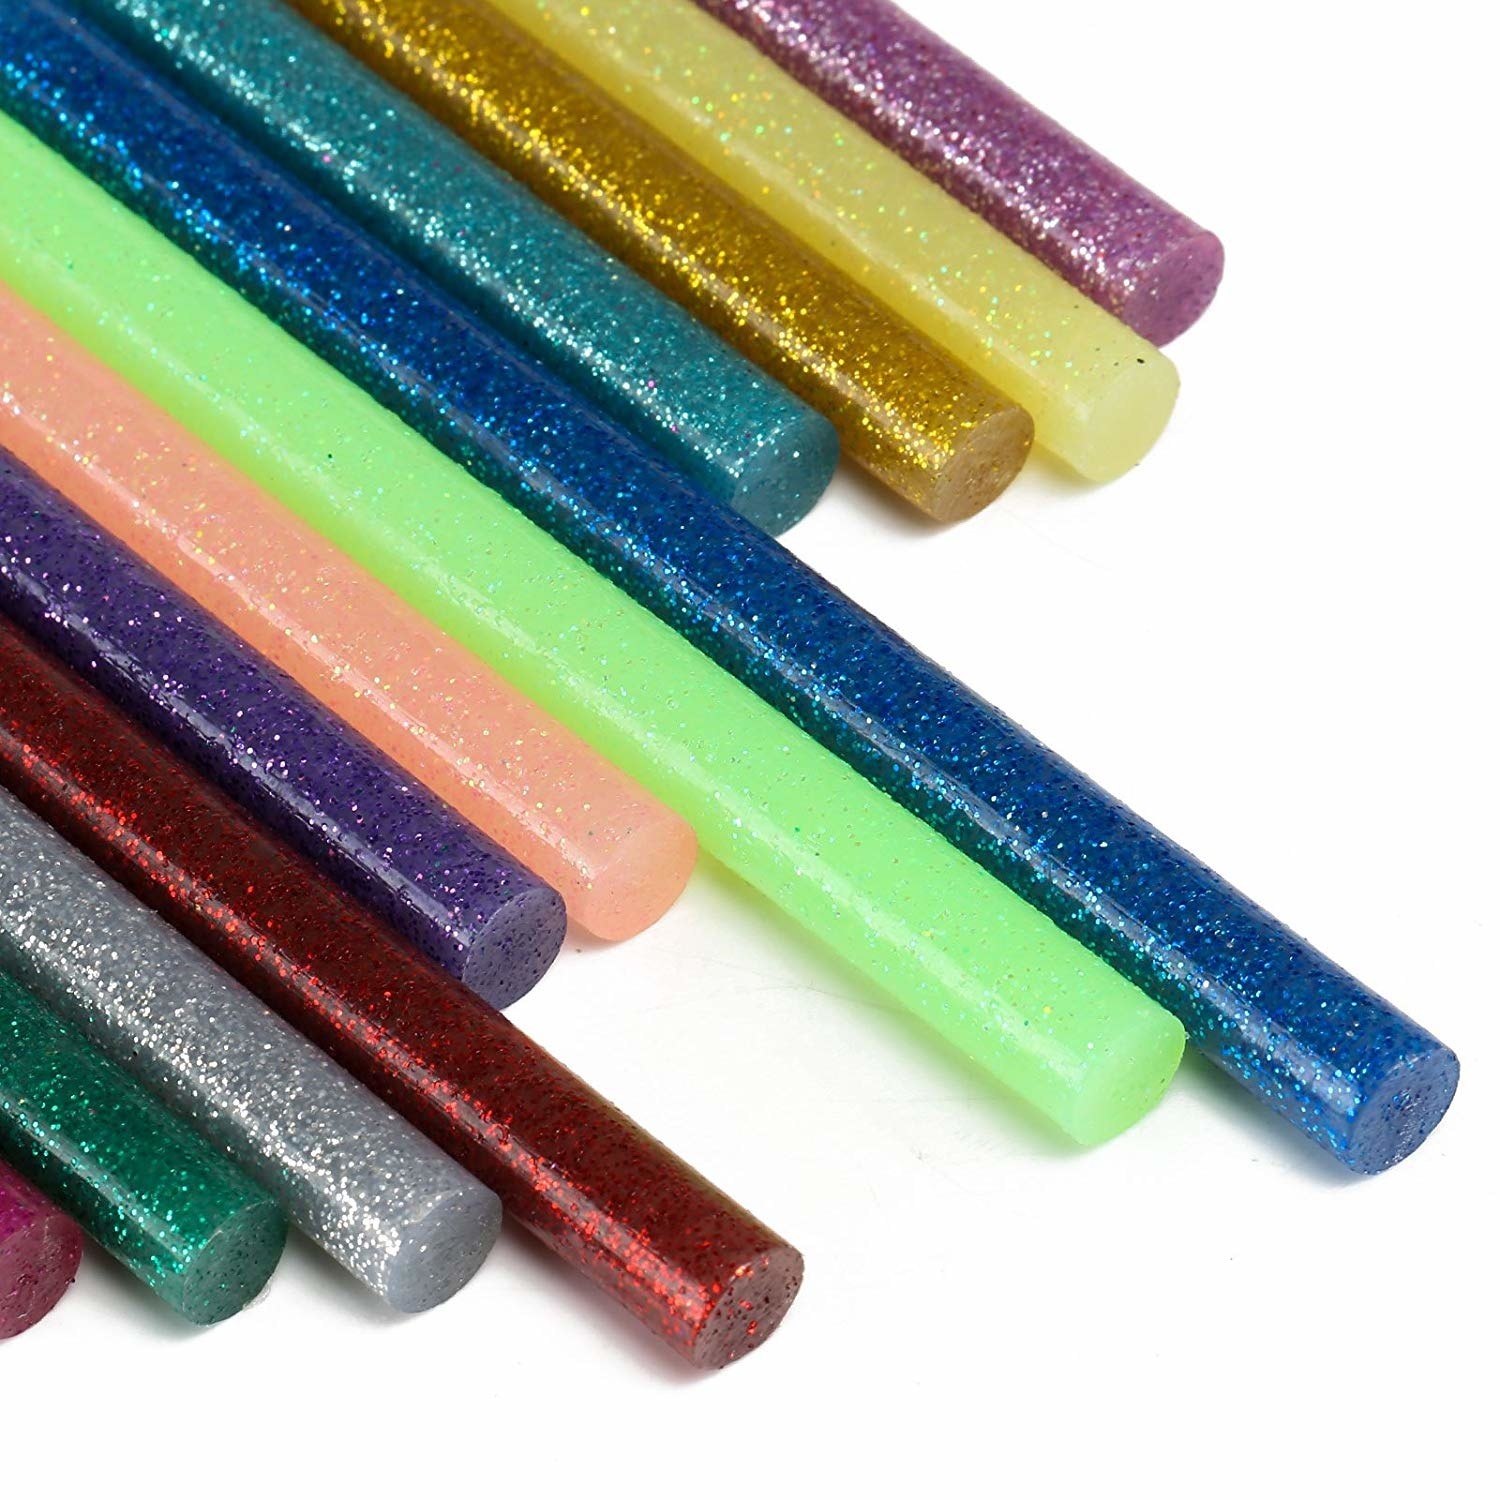 A bunch of different coloured glittery hot glue sticks